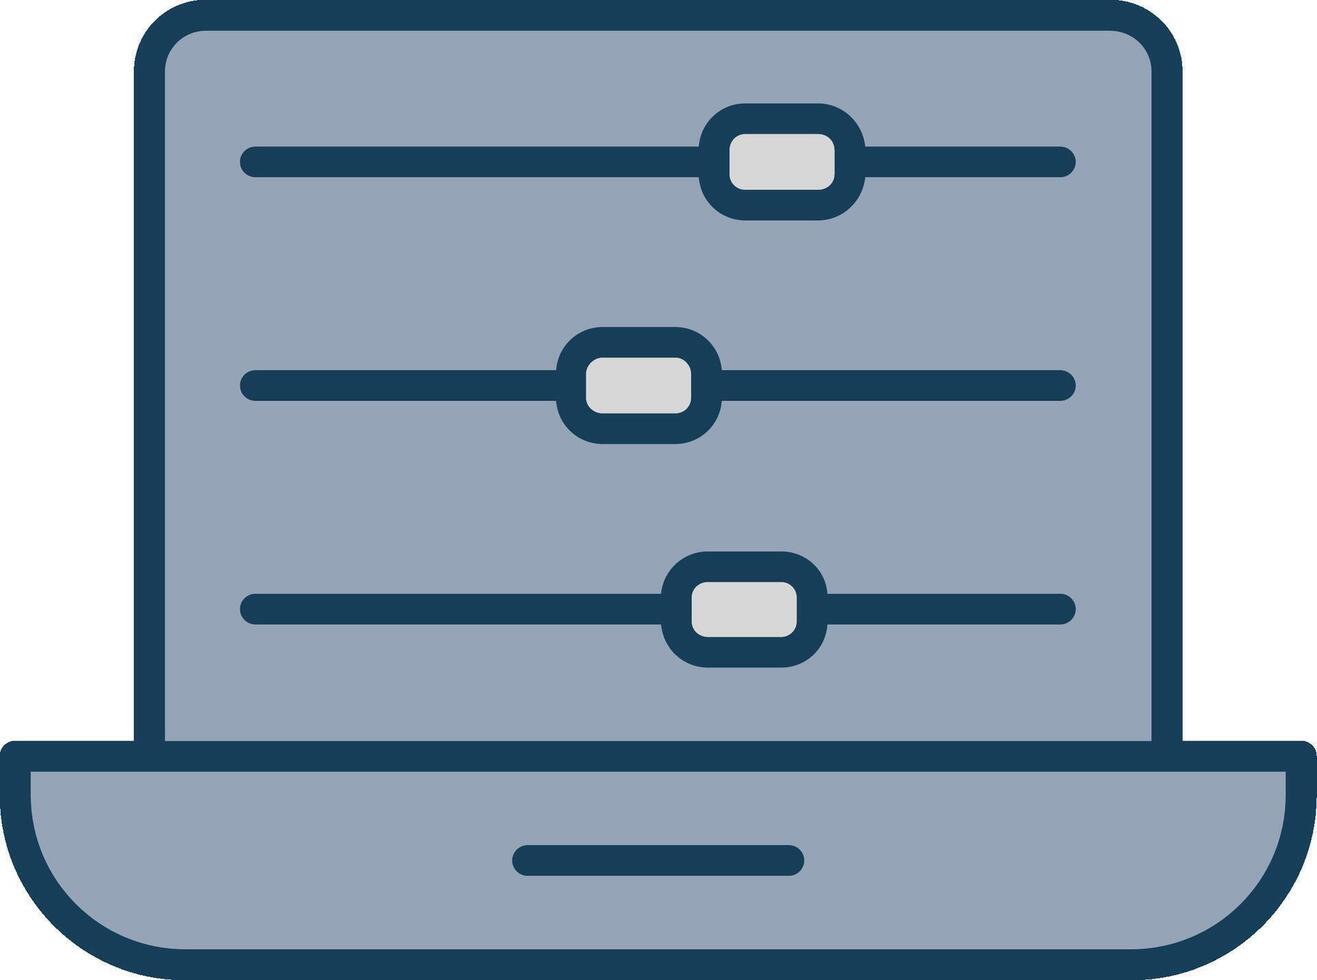 Sliders Line Filled Grey Icon vector